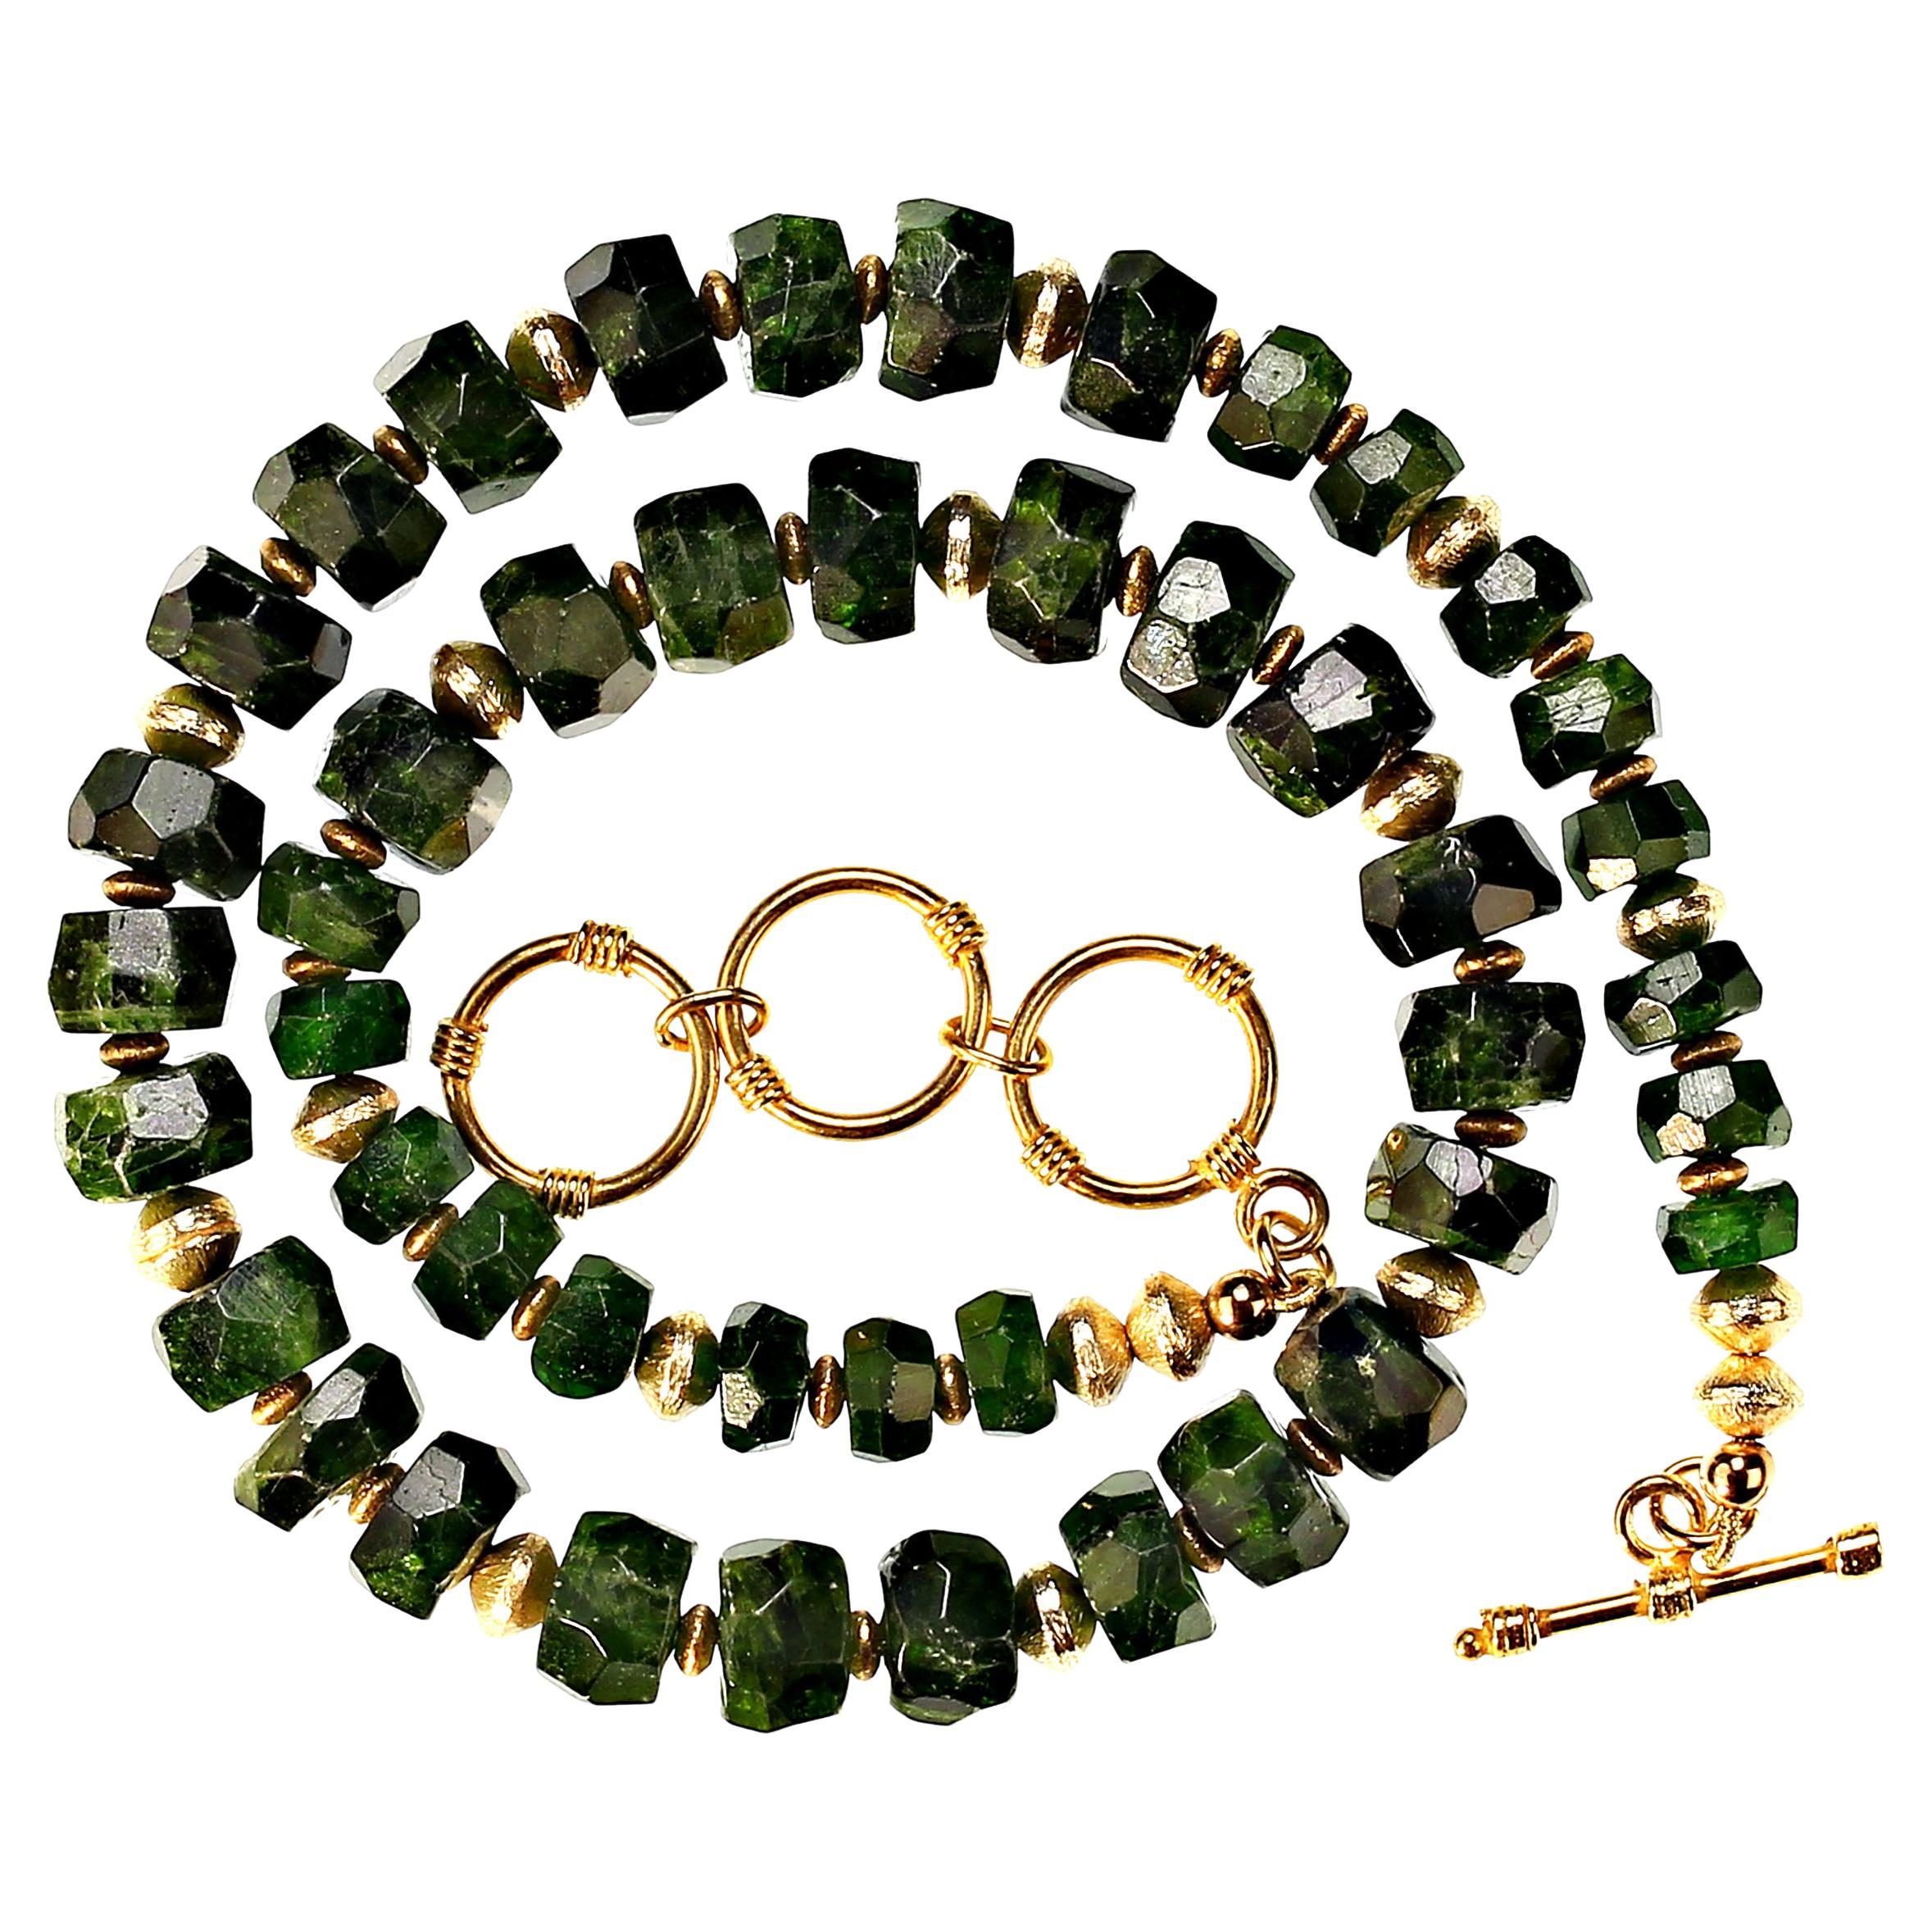 Sparkling green Chrome Diopside necklace for everyone who loves green! These 8-10 MM opaque gems sparkle and pop. Add the gold plate accent rondelles and you have lots to love. This necklace has a gold plate toggle clasp expandable between 17 and 18